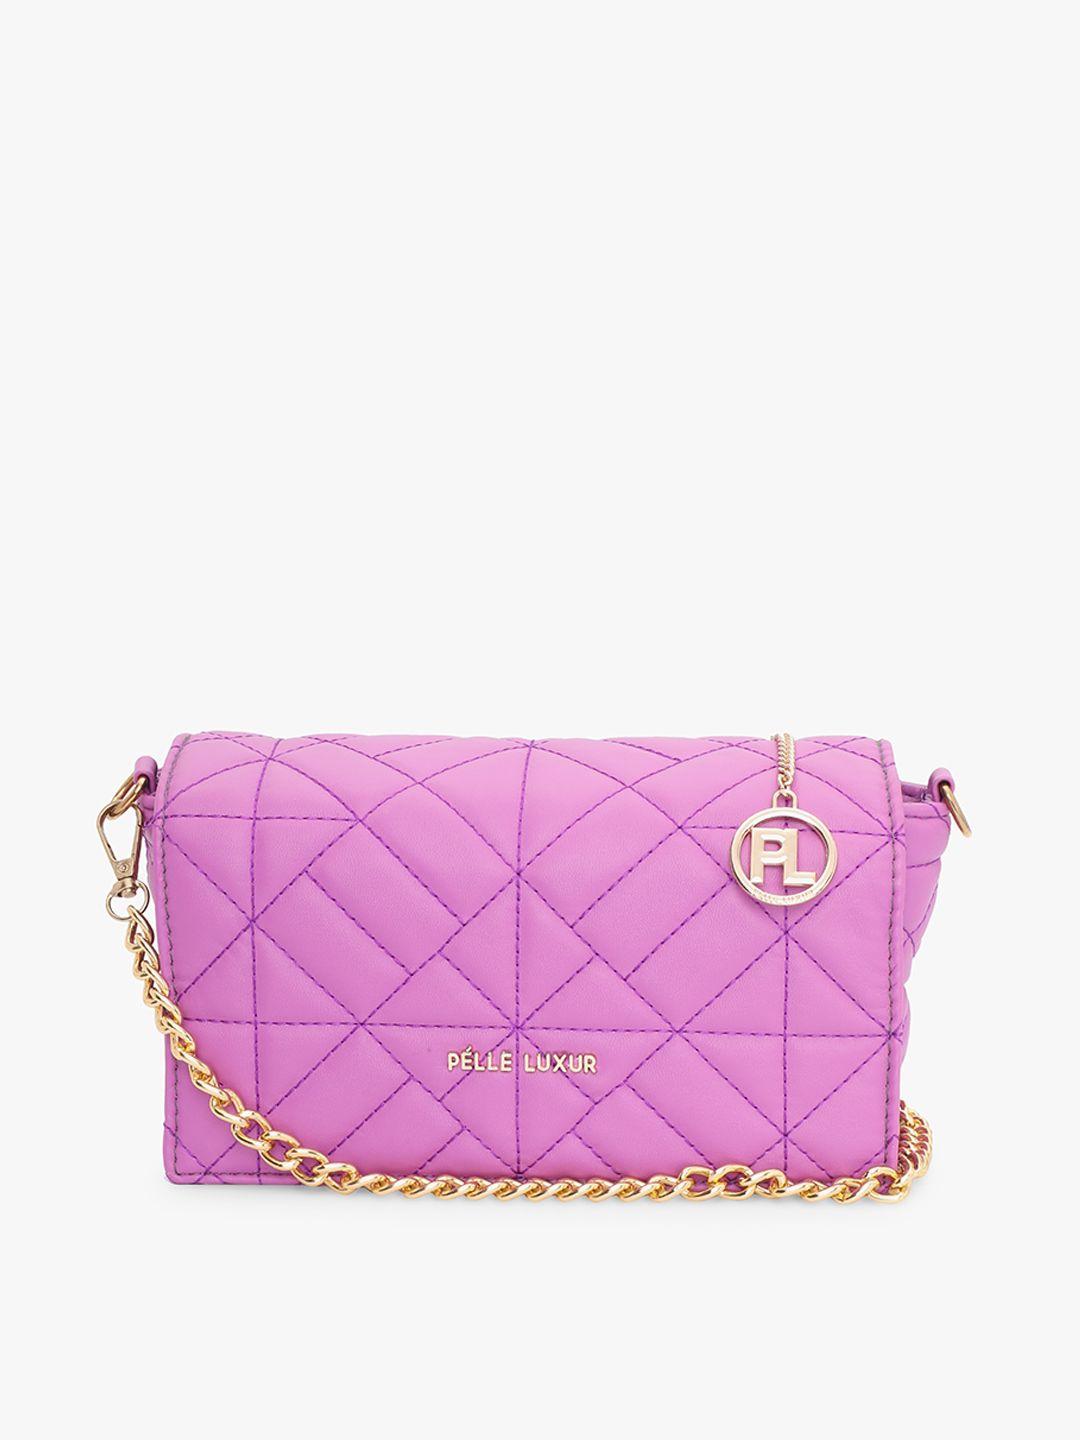 pelle luxur purple textured pu bowling sling bag with quilted